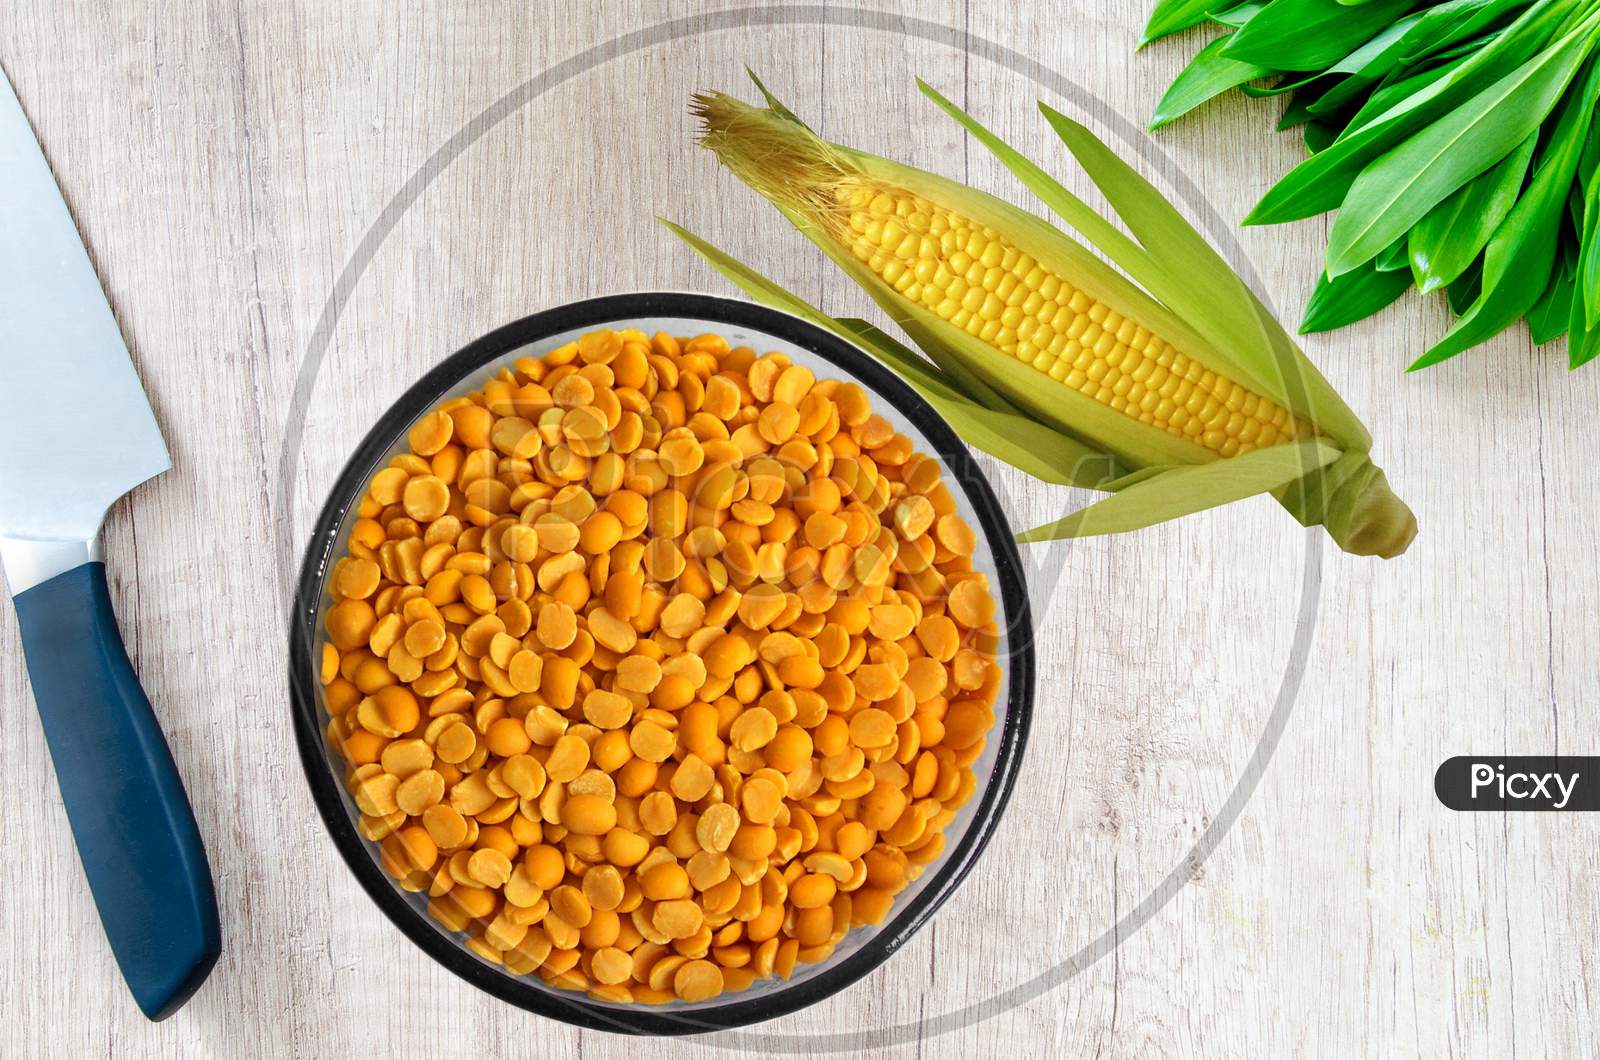 Yellow chopped peas in a bowl and corn on wooden background.Yellow split chickpea peas boot chana dal lentil pulse bean on wooden background,top view.healthy food.